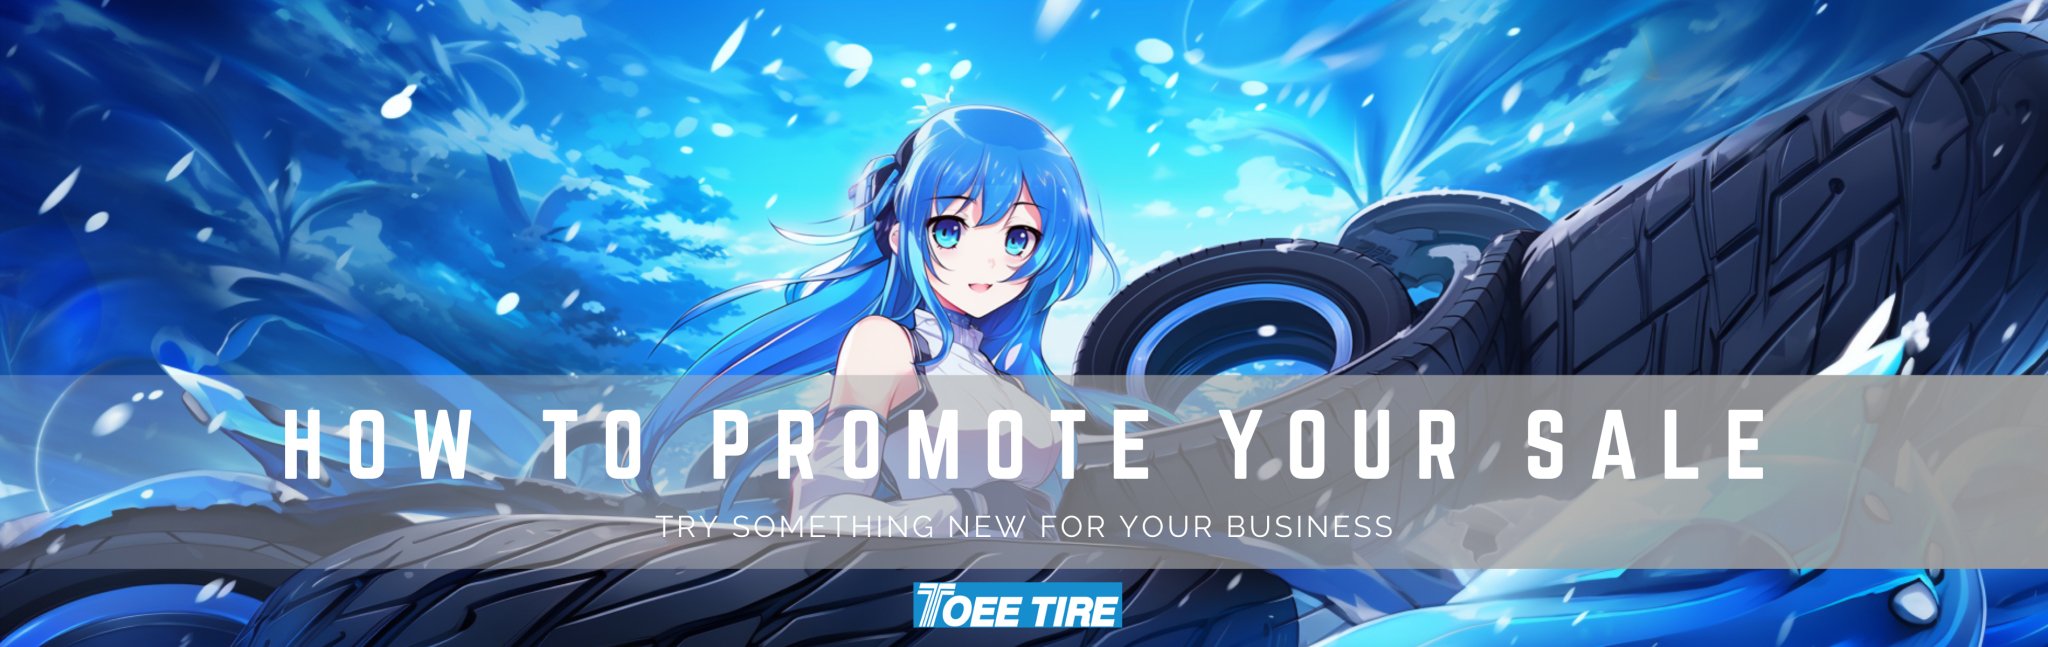 How to Promote Your Tire and Rim Sales - Toee Tire